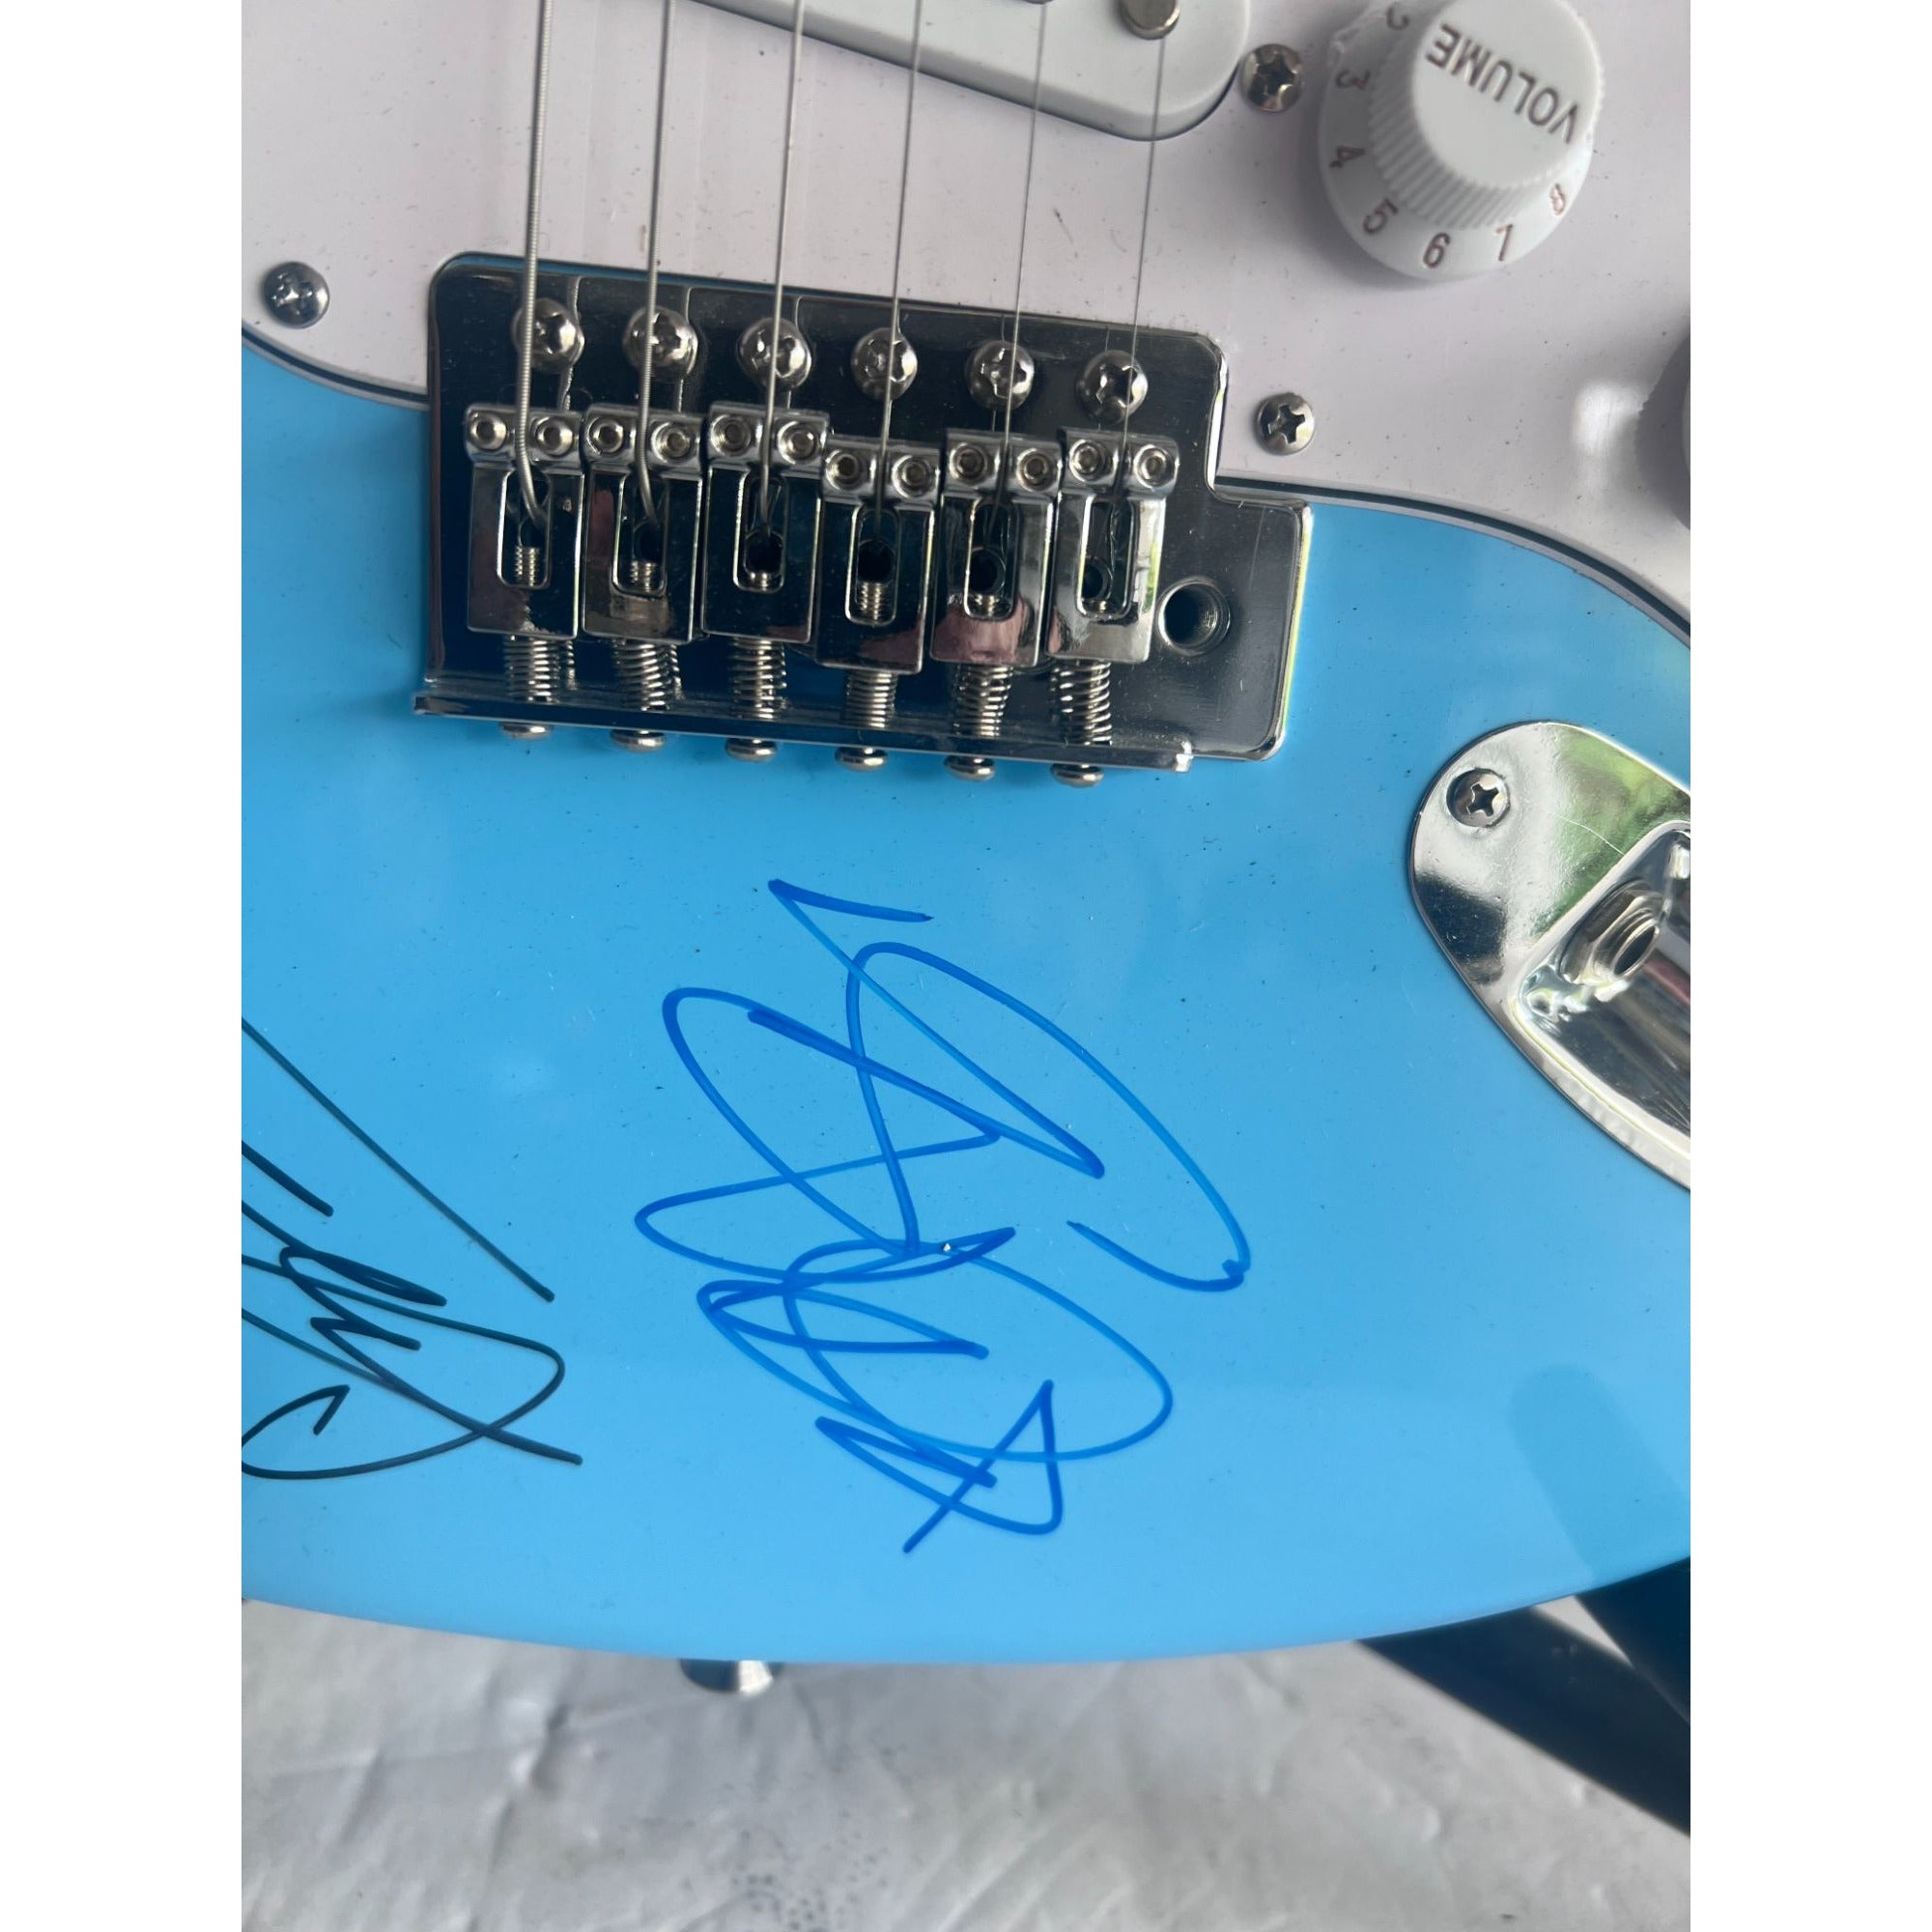 Chris Cornell Jerry Cantrell David Groll Taylor Hawkins the Foo Fighters Billy Joe Armstrong Tre Cool Stratocaster electric guitar signed